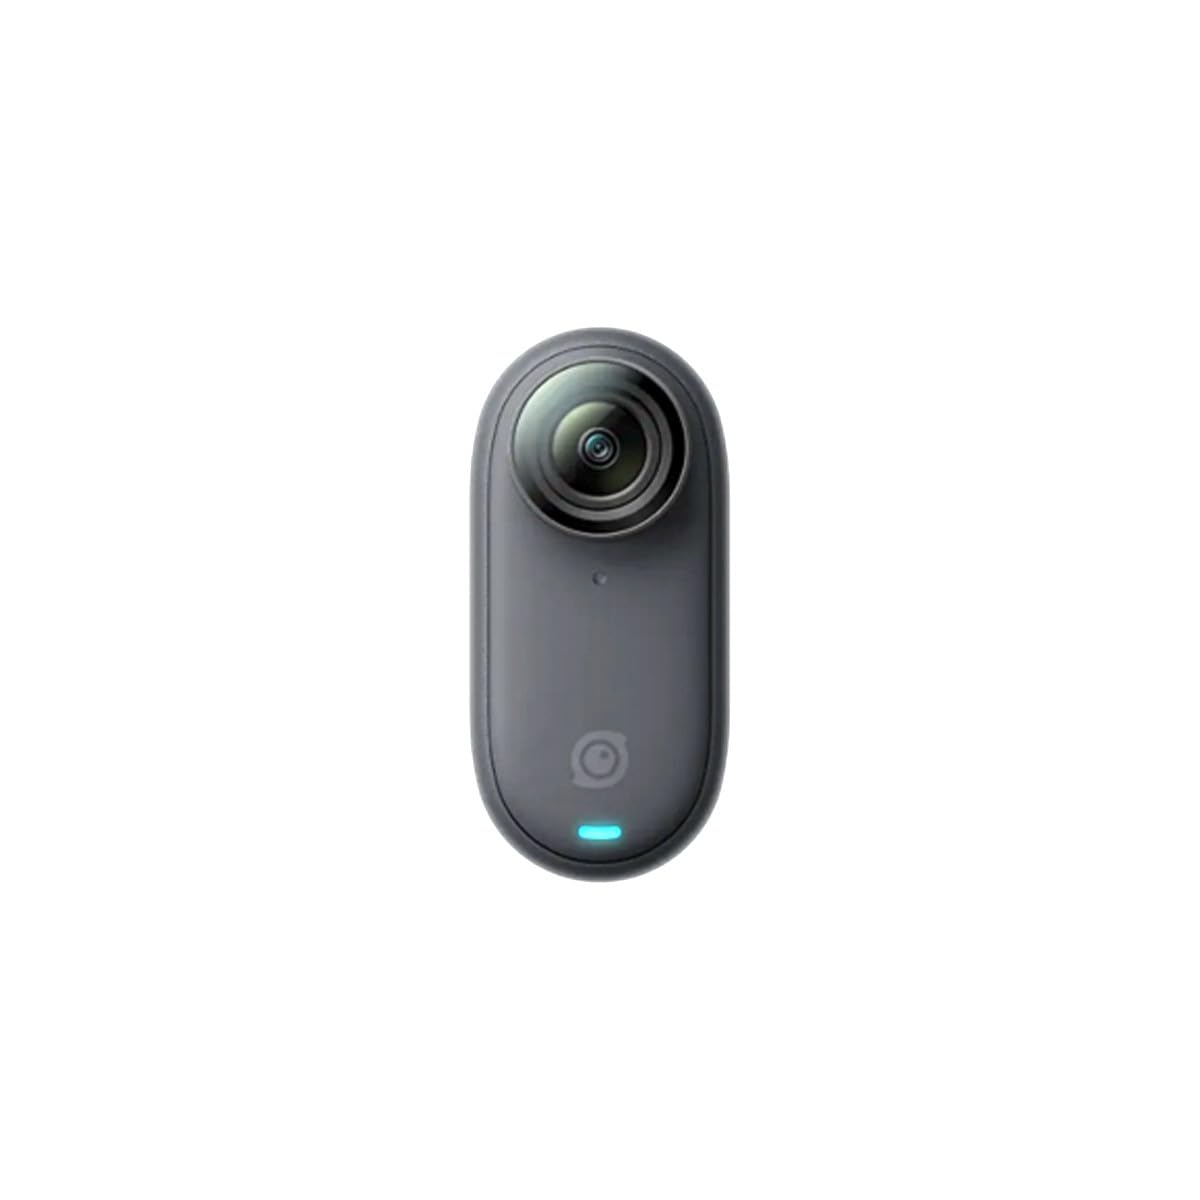 Insta360 GO 3 Midnight Black (64GB) – Small & Lightweight Action Camera, Portable and Versatile, Hands-Free POV, Mount Anywhere, Stabilization, Multifunctional Action Pod, Waterproof